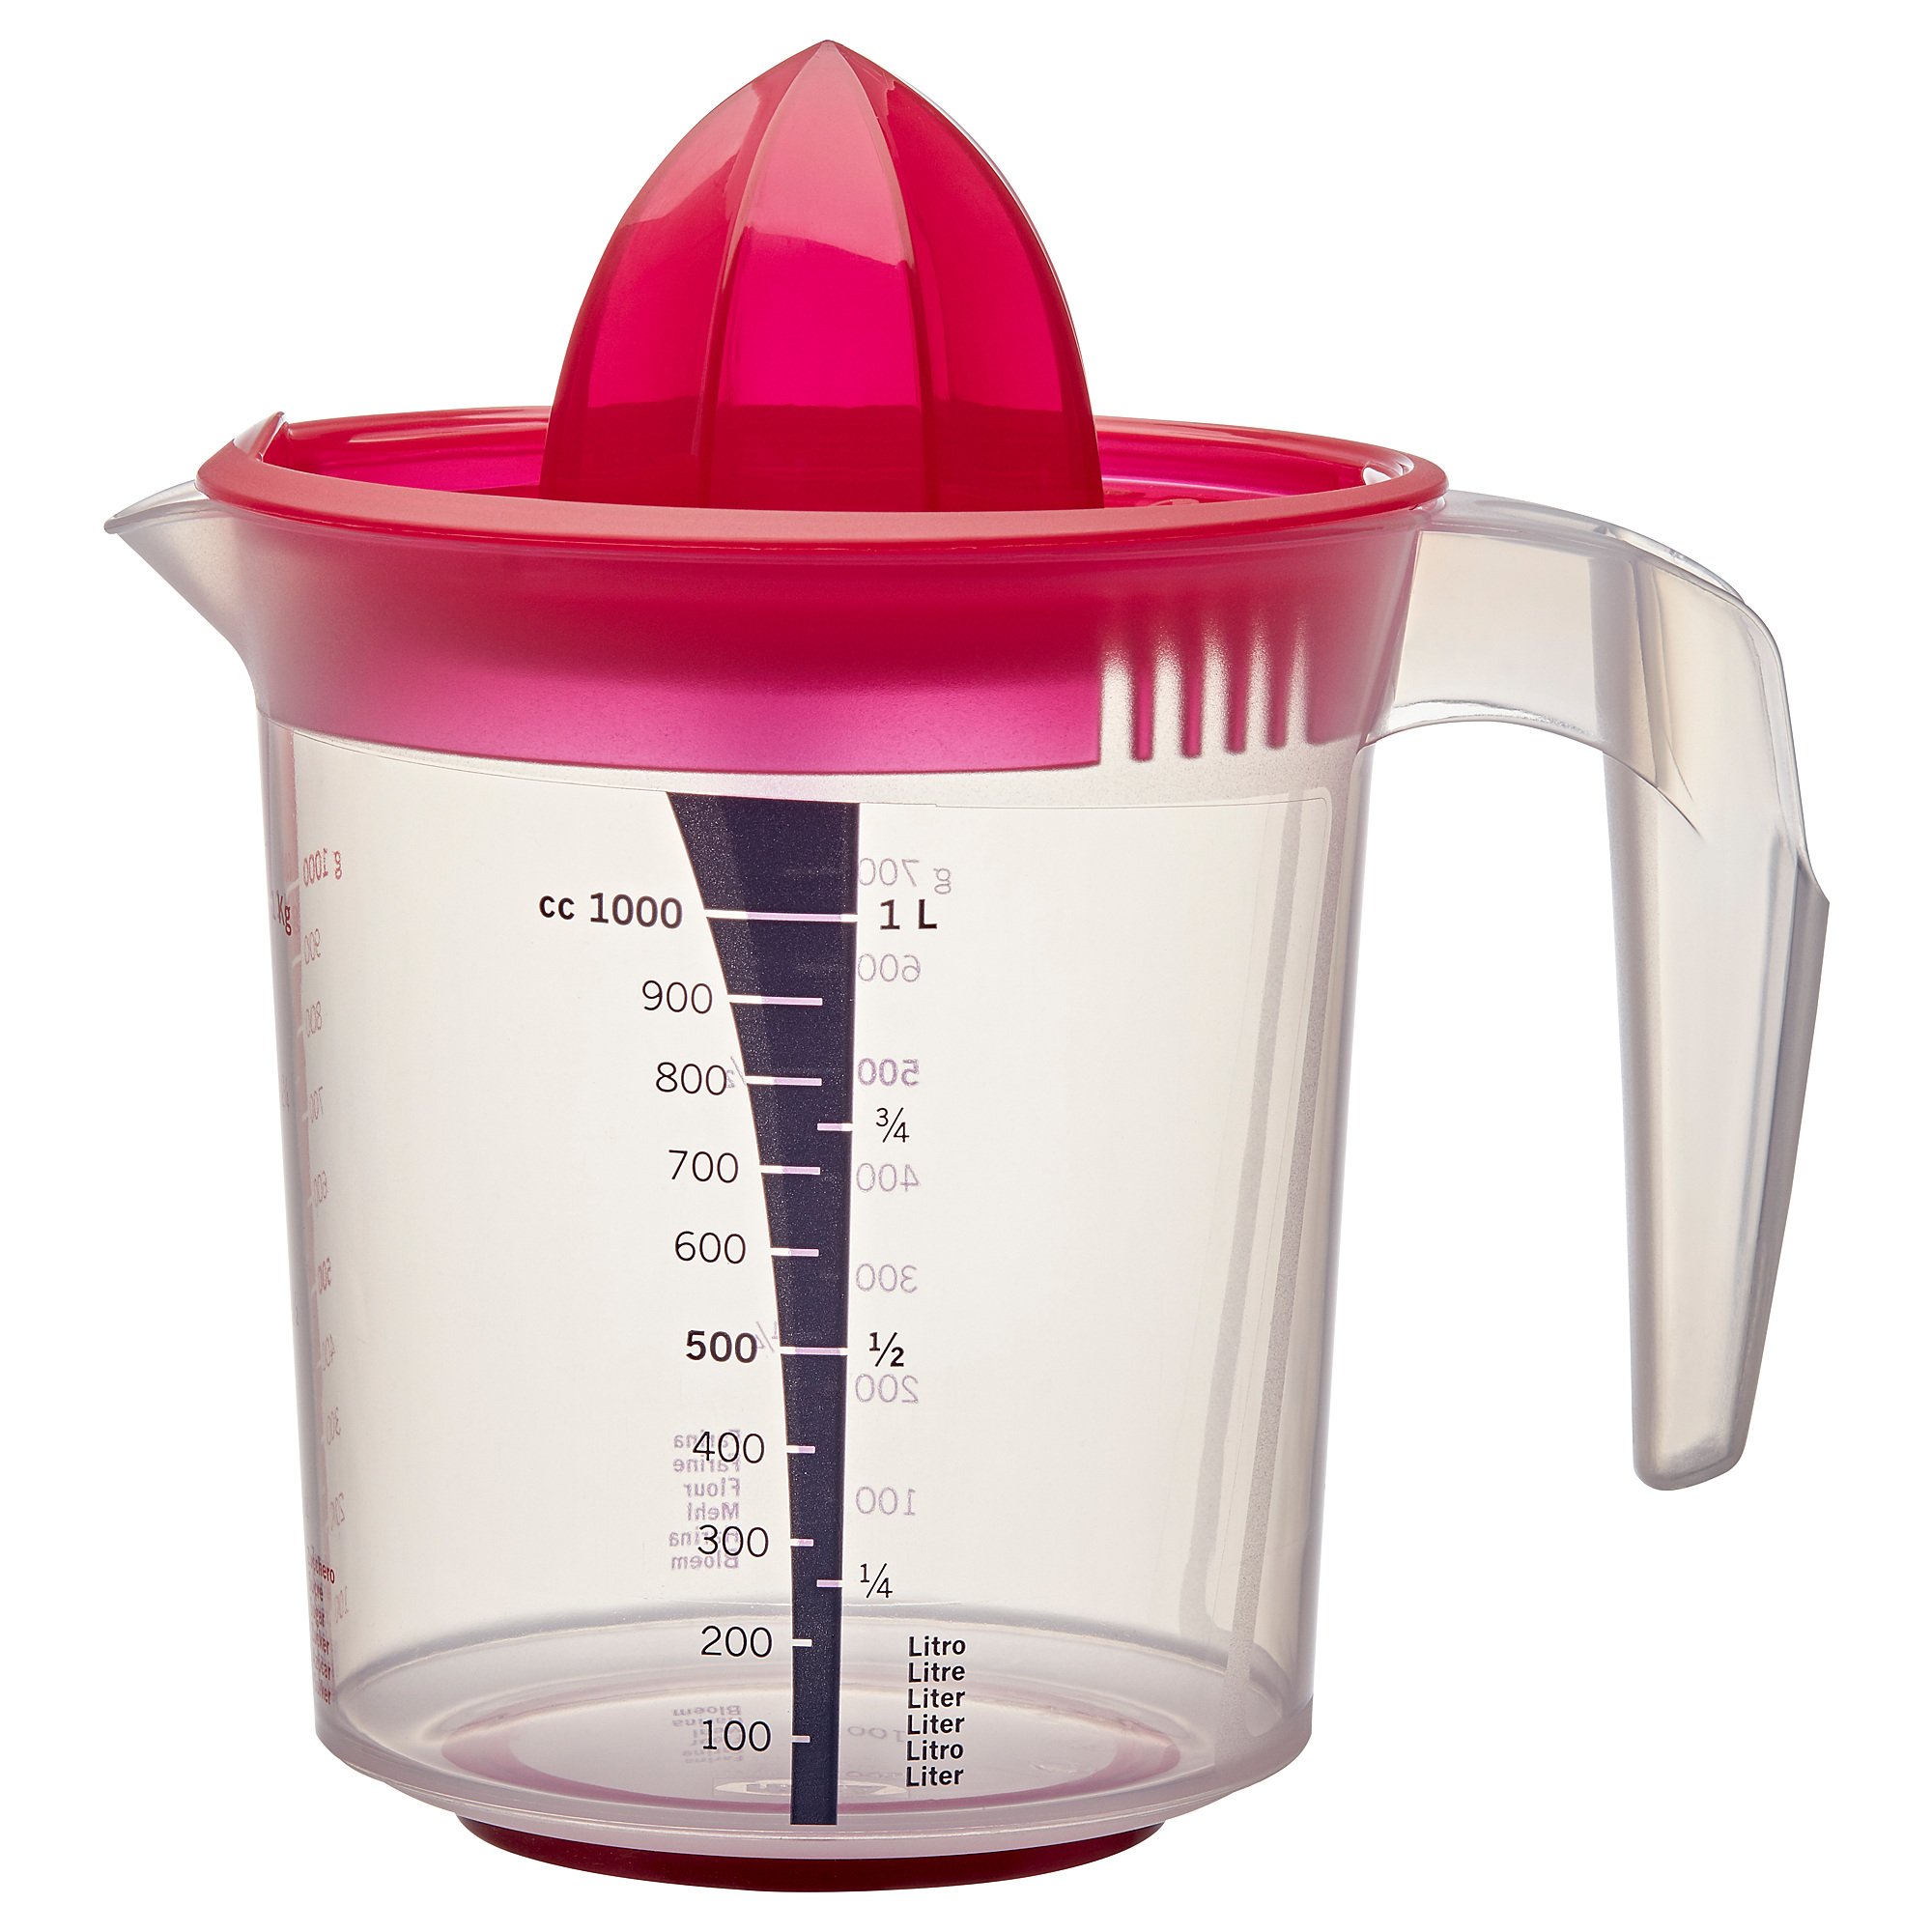 INFRIA jug with lid and citrus squeezer